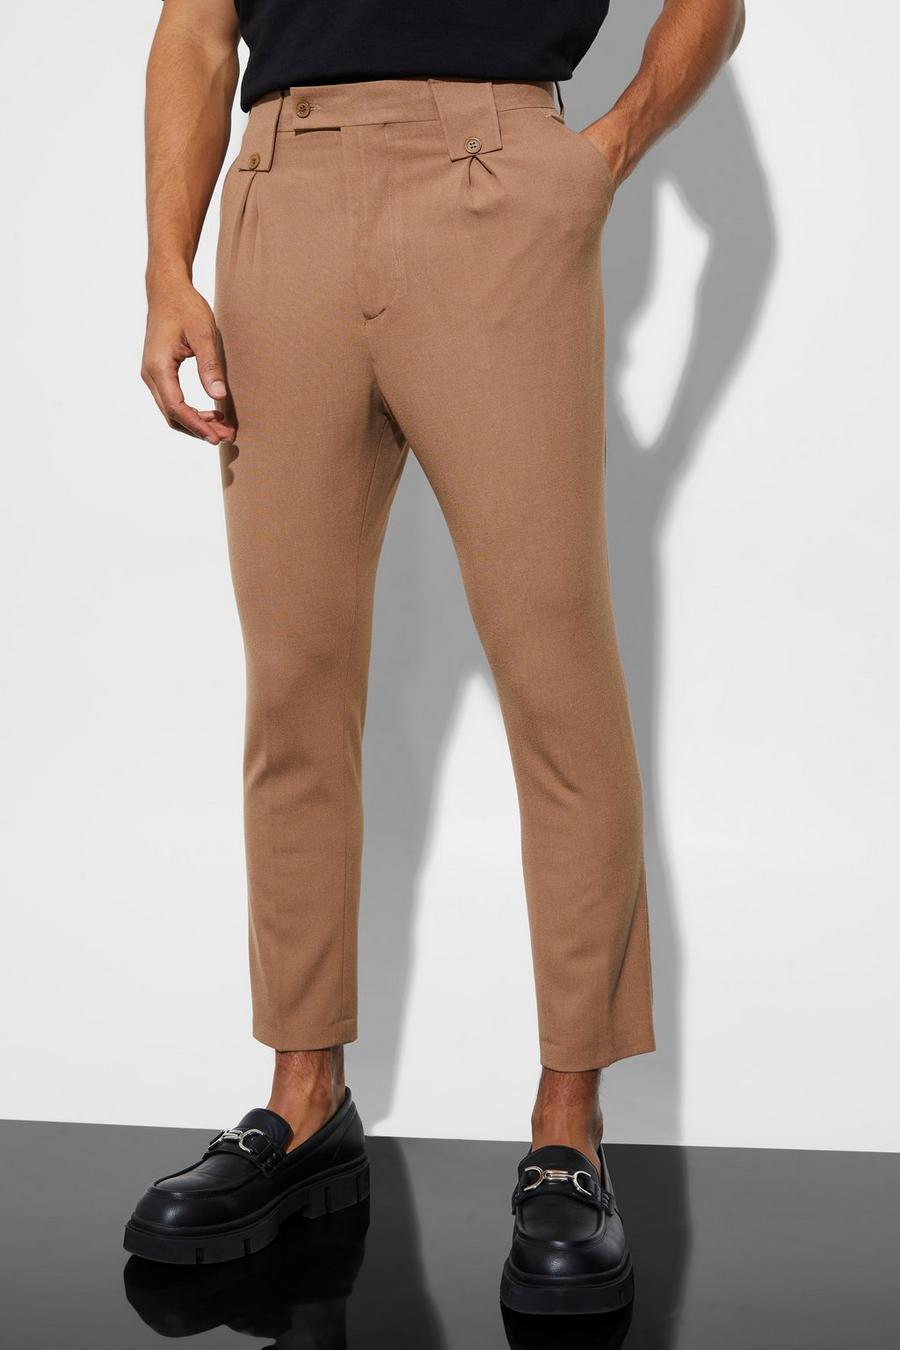 boohooMAN Men's Tapered High Rise Trouser with Belt Loops